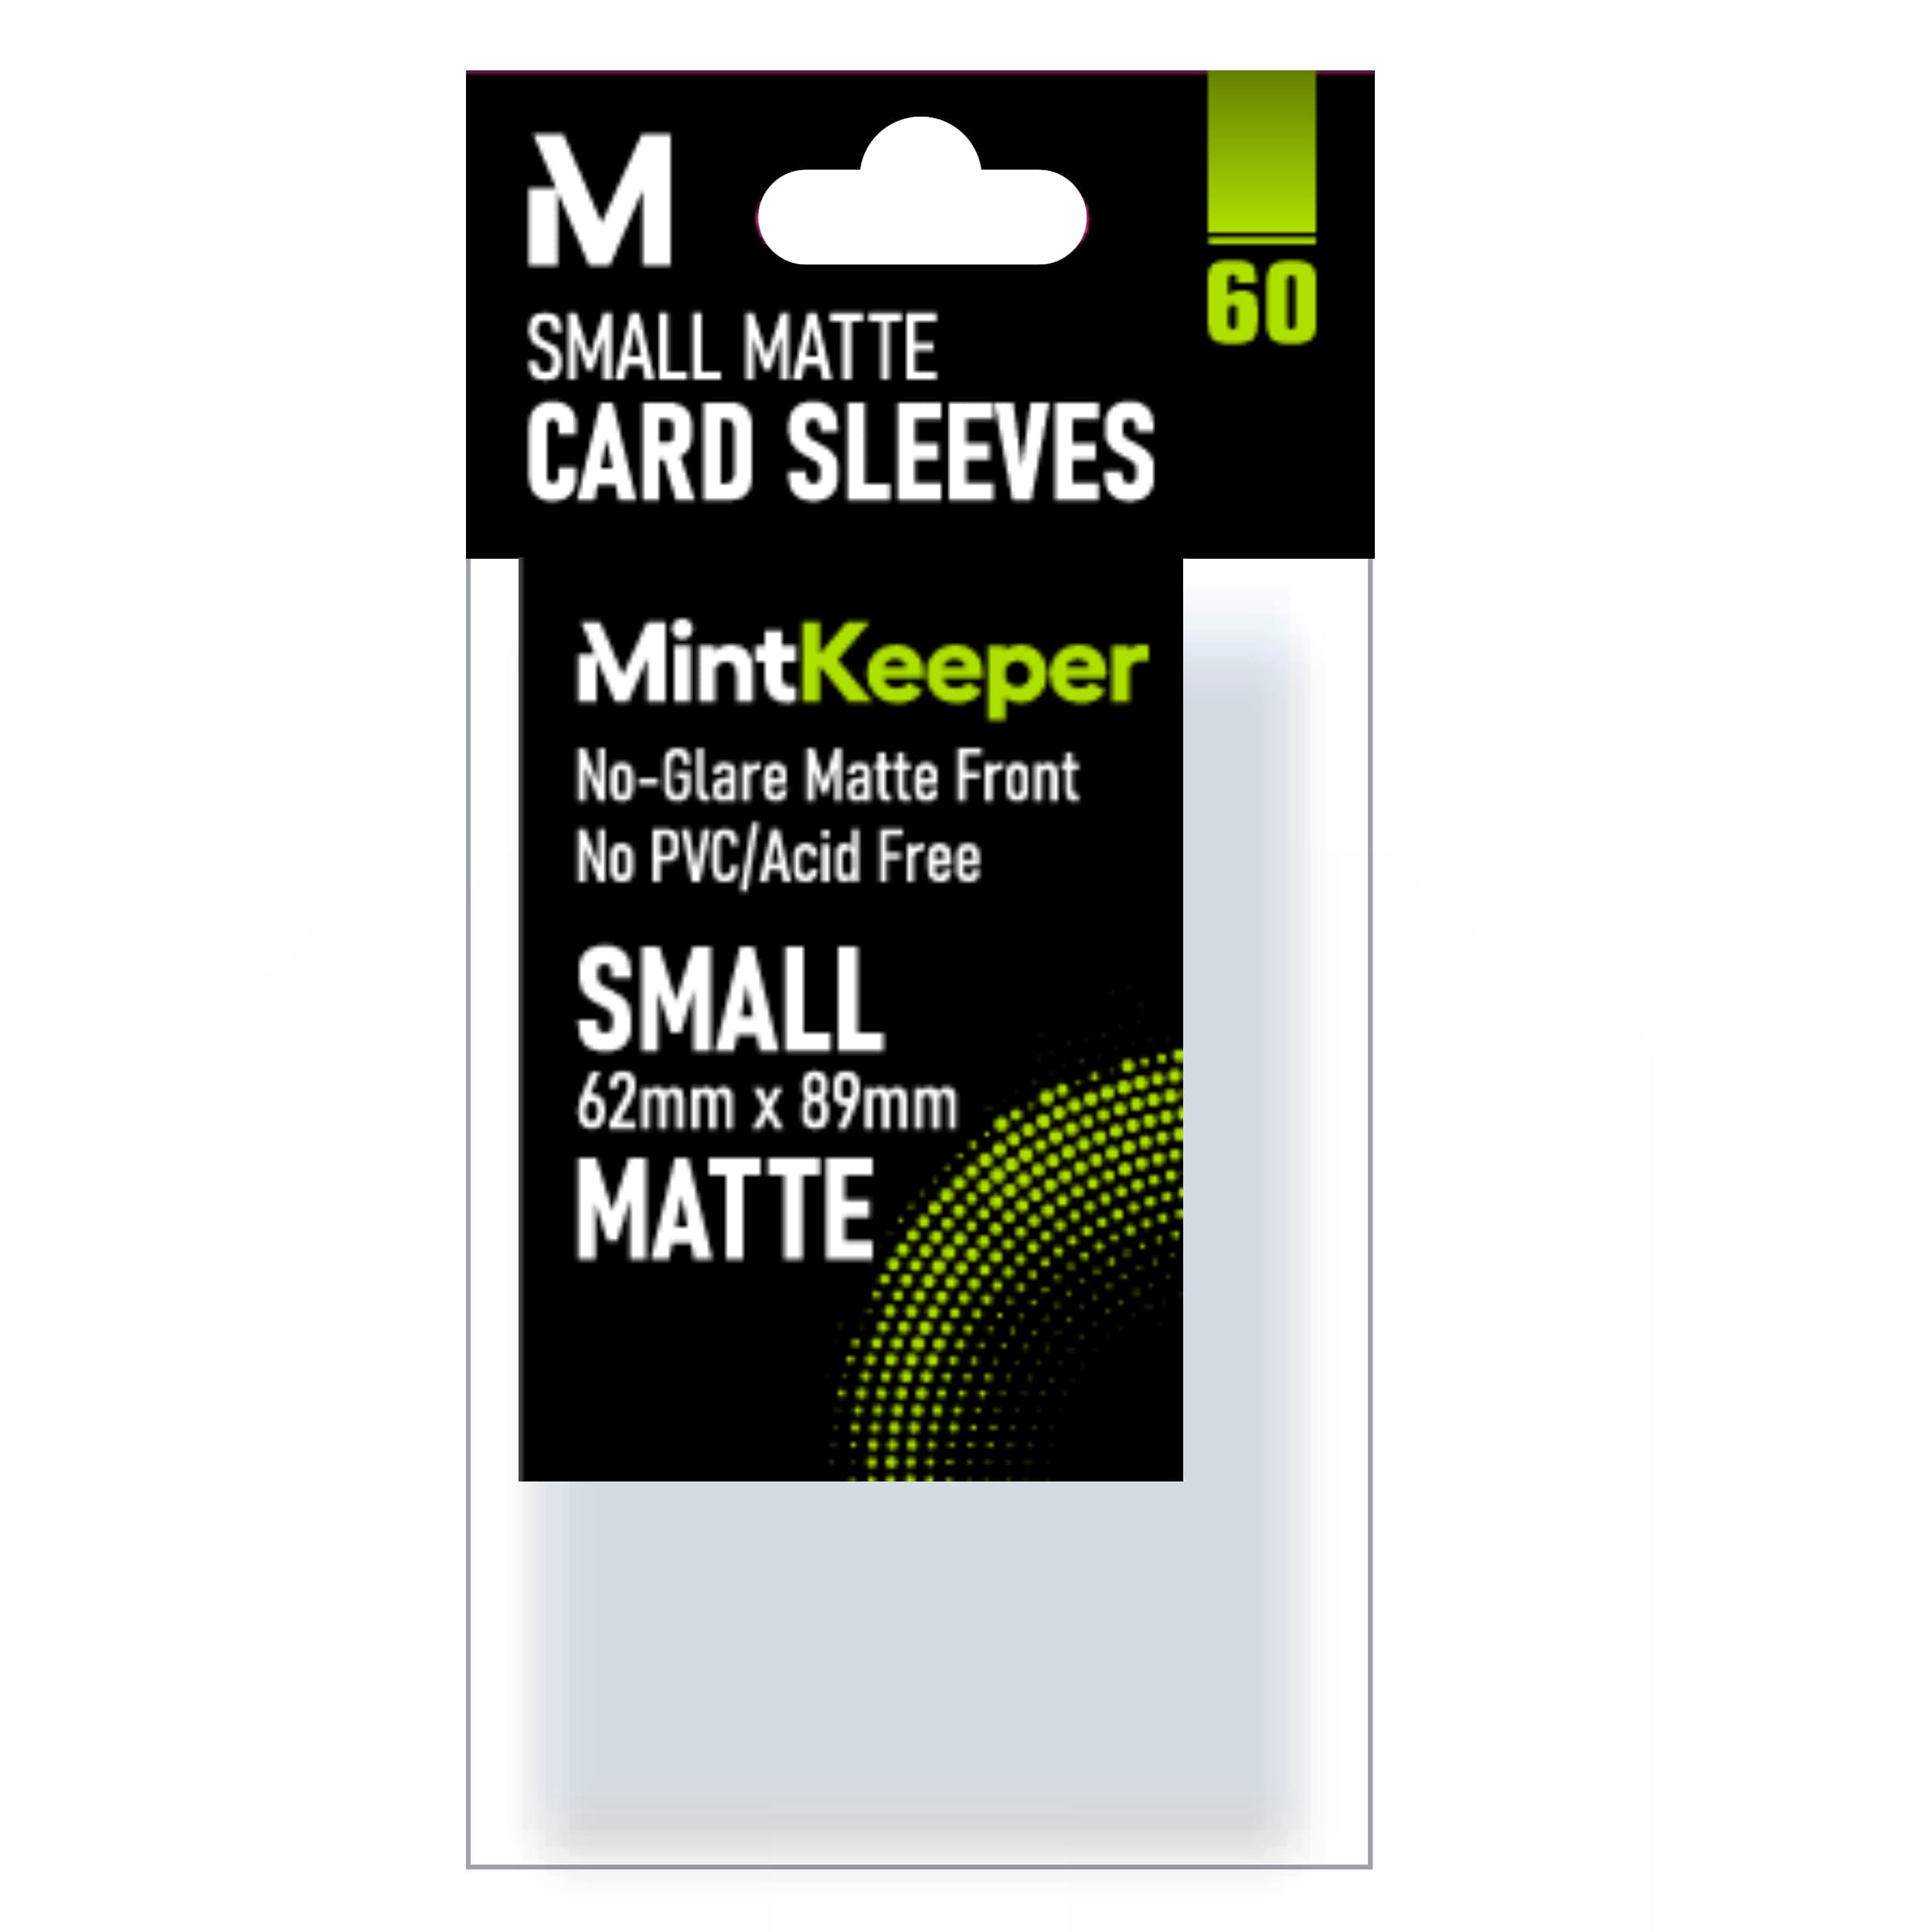 MintKeeper - Small Trading Card Sleeves- Matte (60)